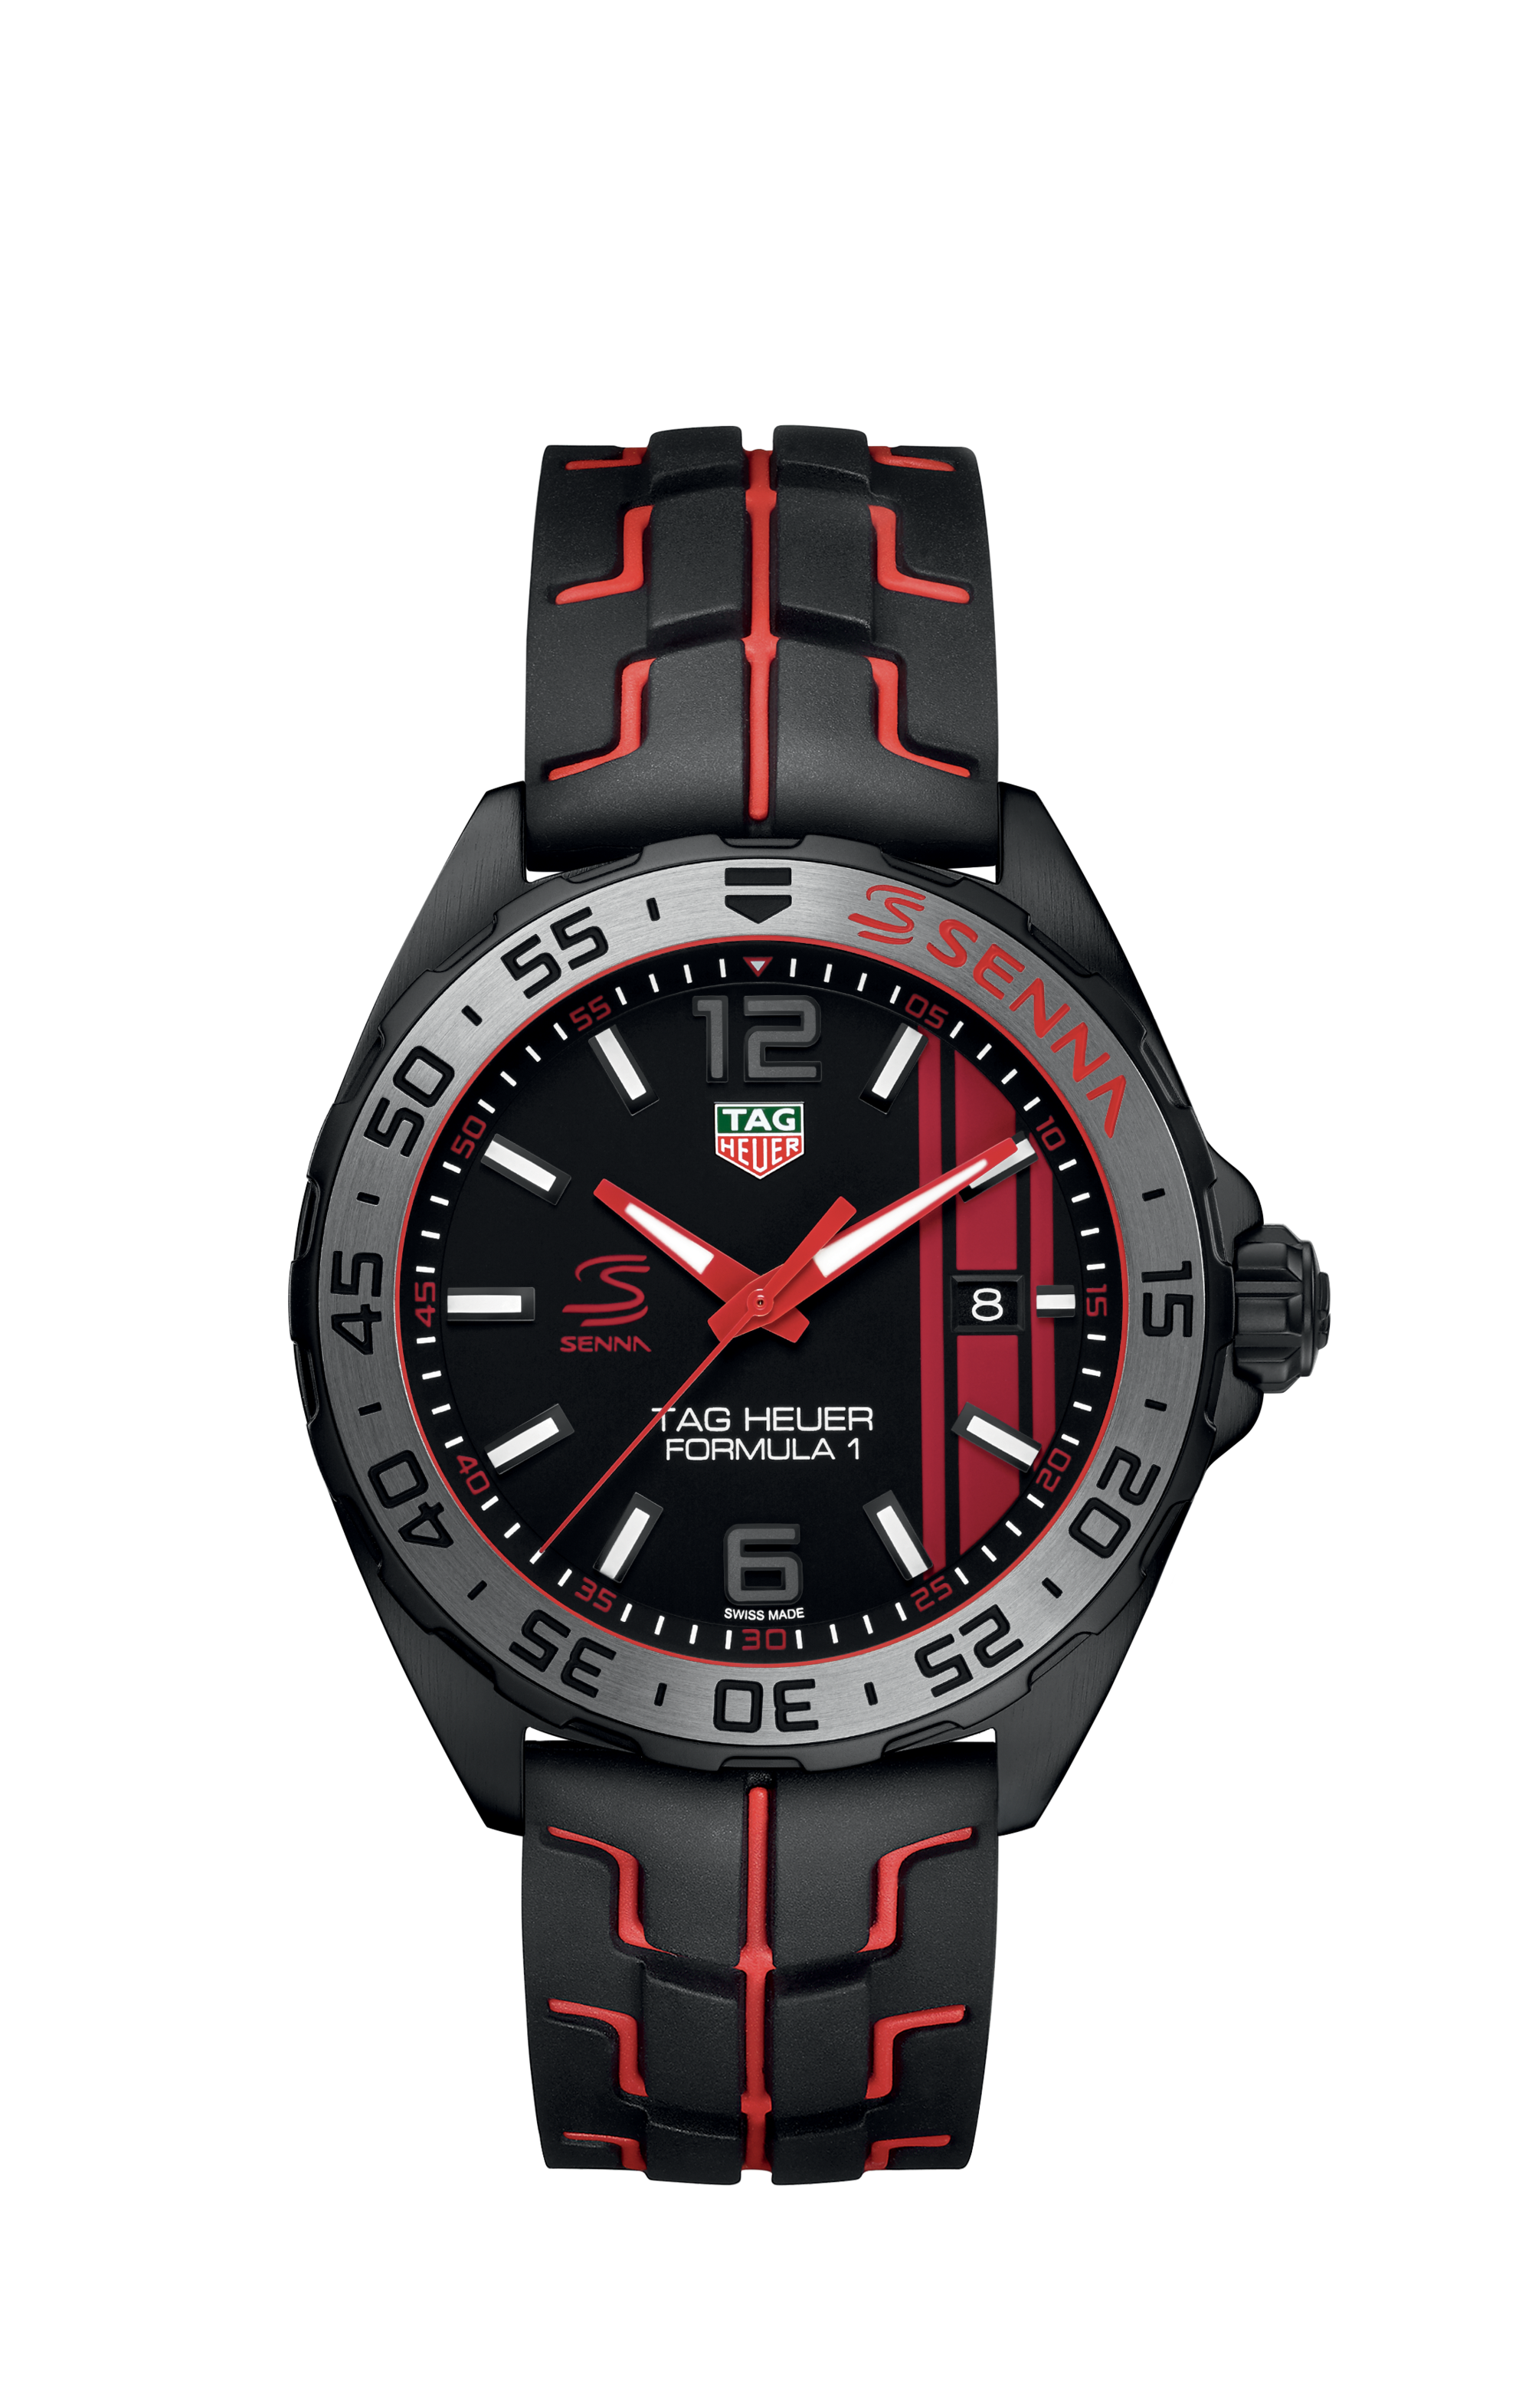 TAG Heuer Carrera Porsche Chronograph Special EditionTAG Heuer Carrera Porsche Chronograph Special Edition 2021 New 44mm